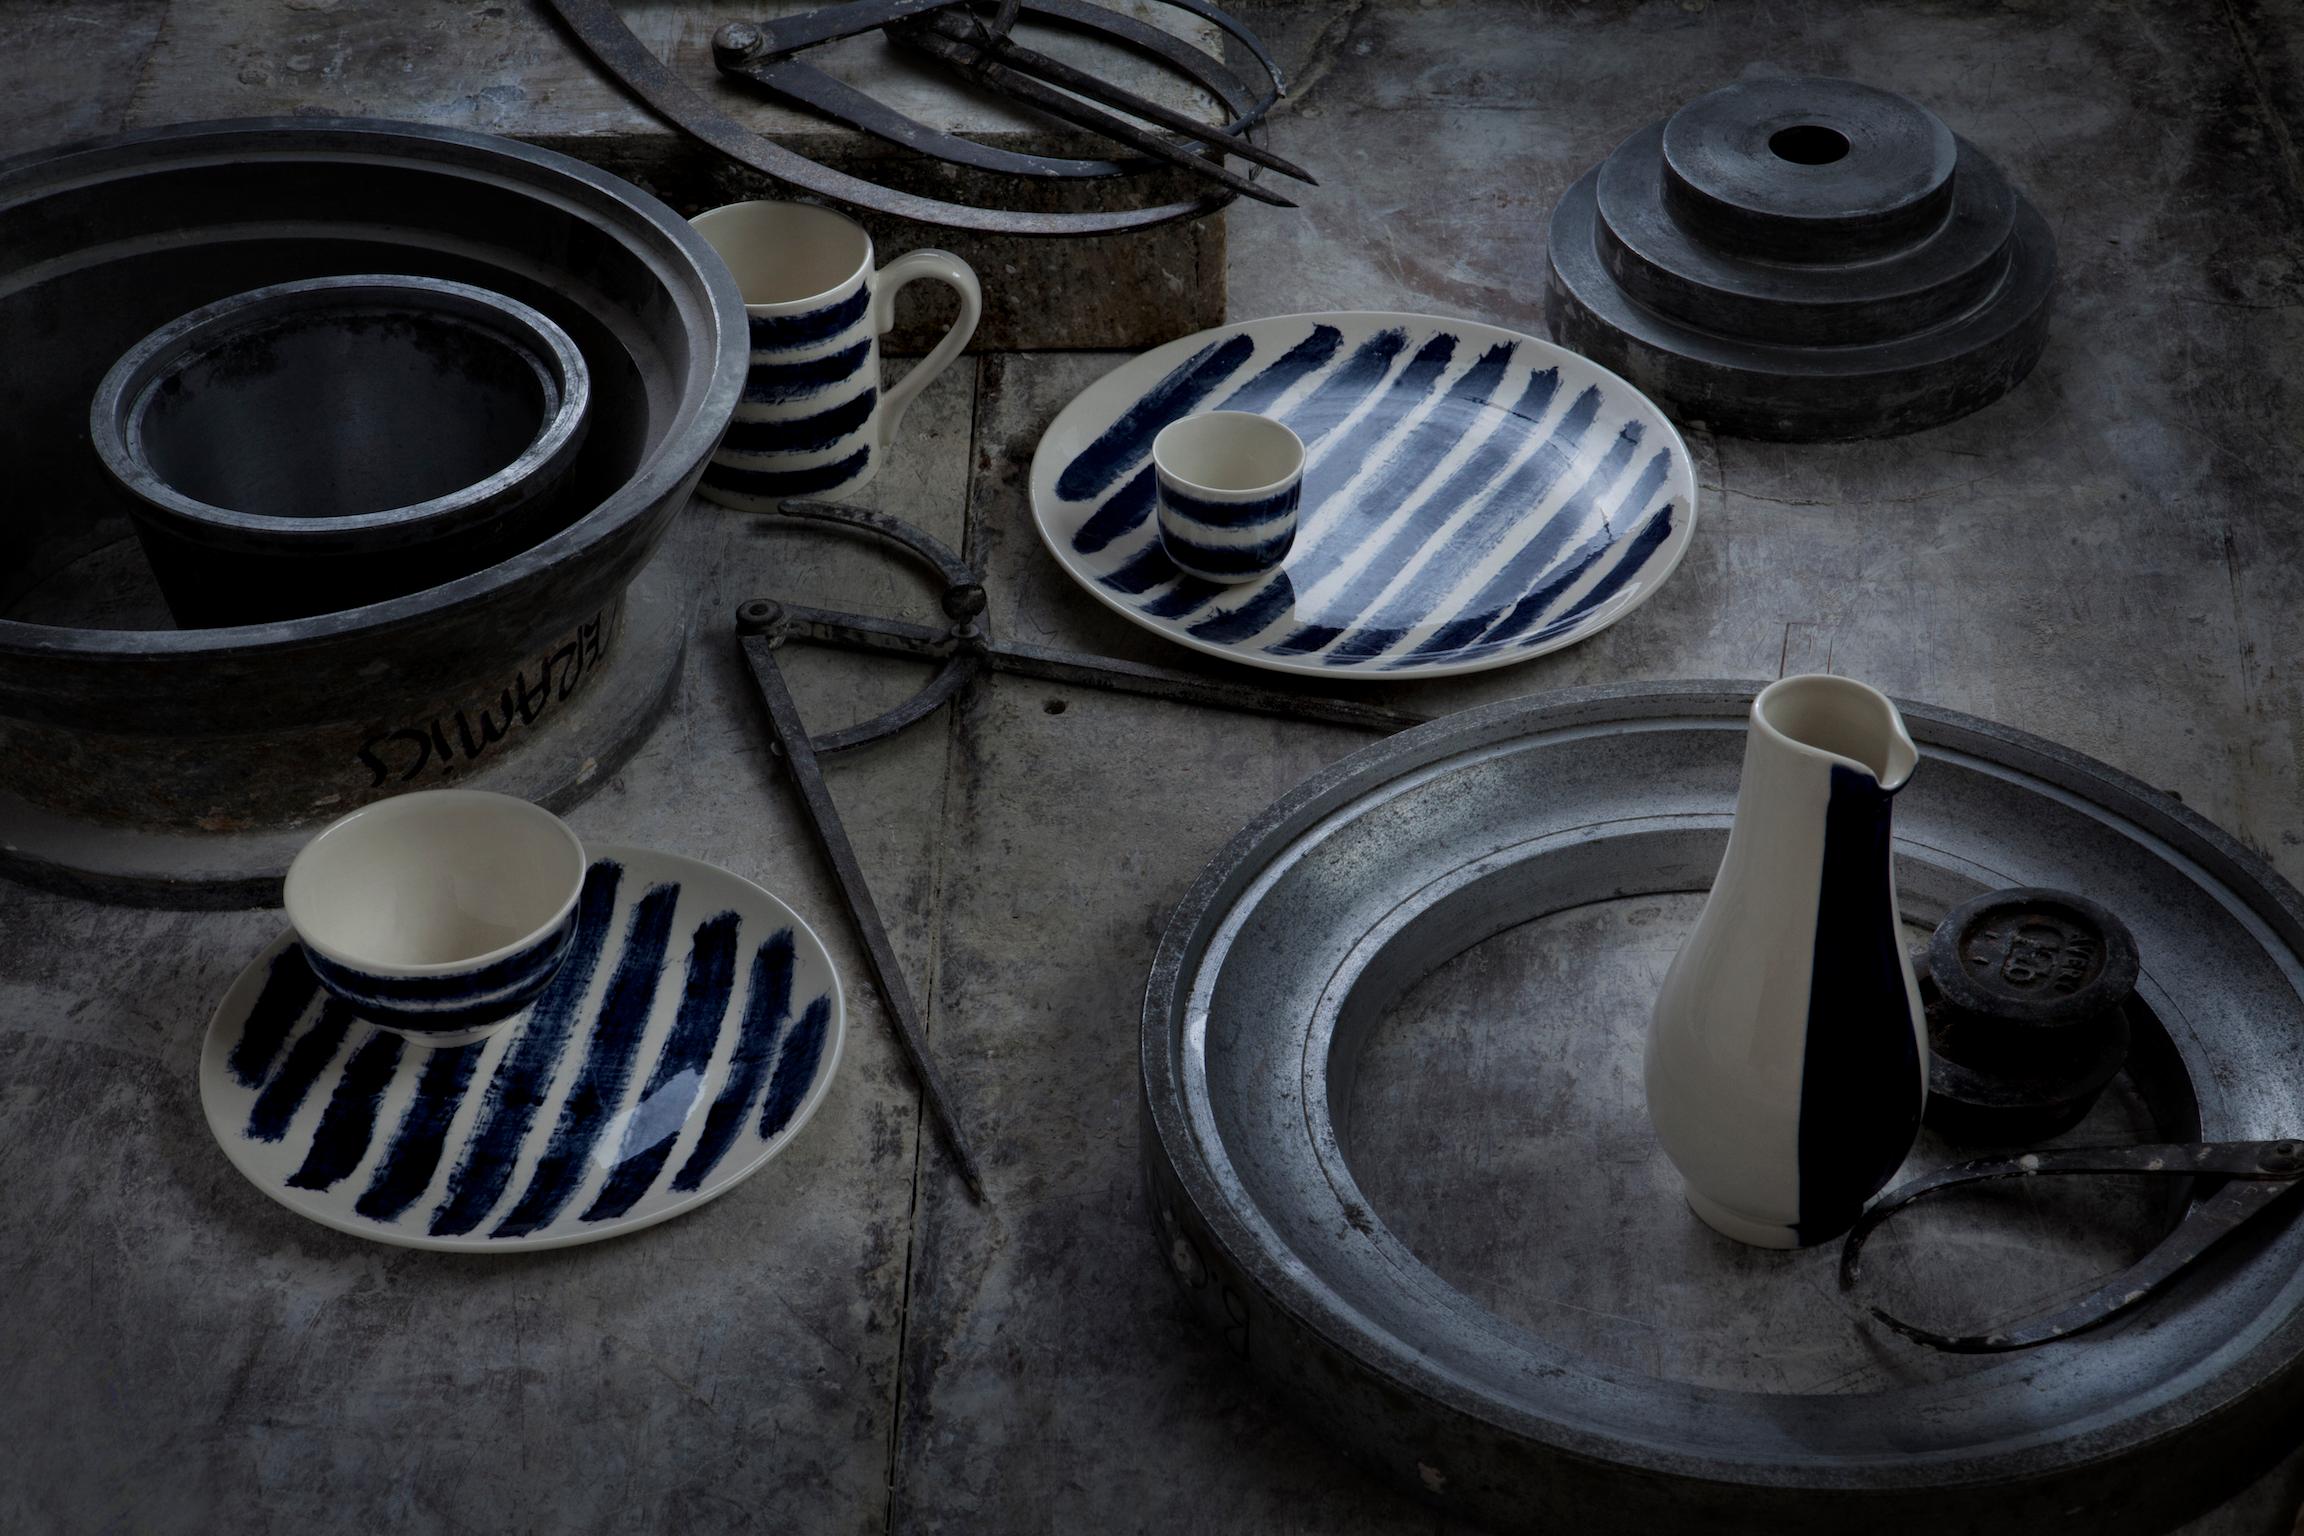 Indigo Rain, 1882 Ltd. with Faye Toogood. Designer Faye Toogood’s addition to her range of ceramic designs for 1882 Ltd. puts a fresh spin on the forms and traditions of English creamware. Indigo Rain adds a touch of contemporary flair to the homely